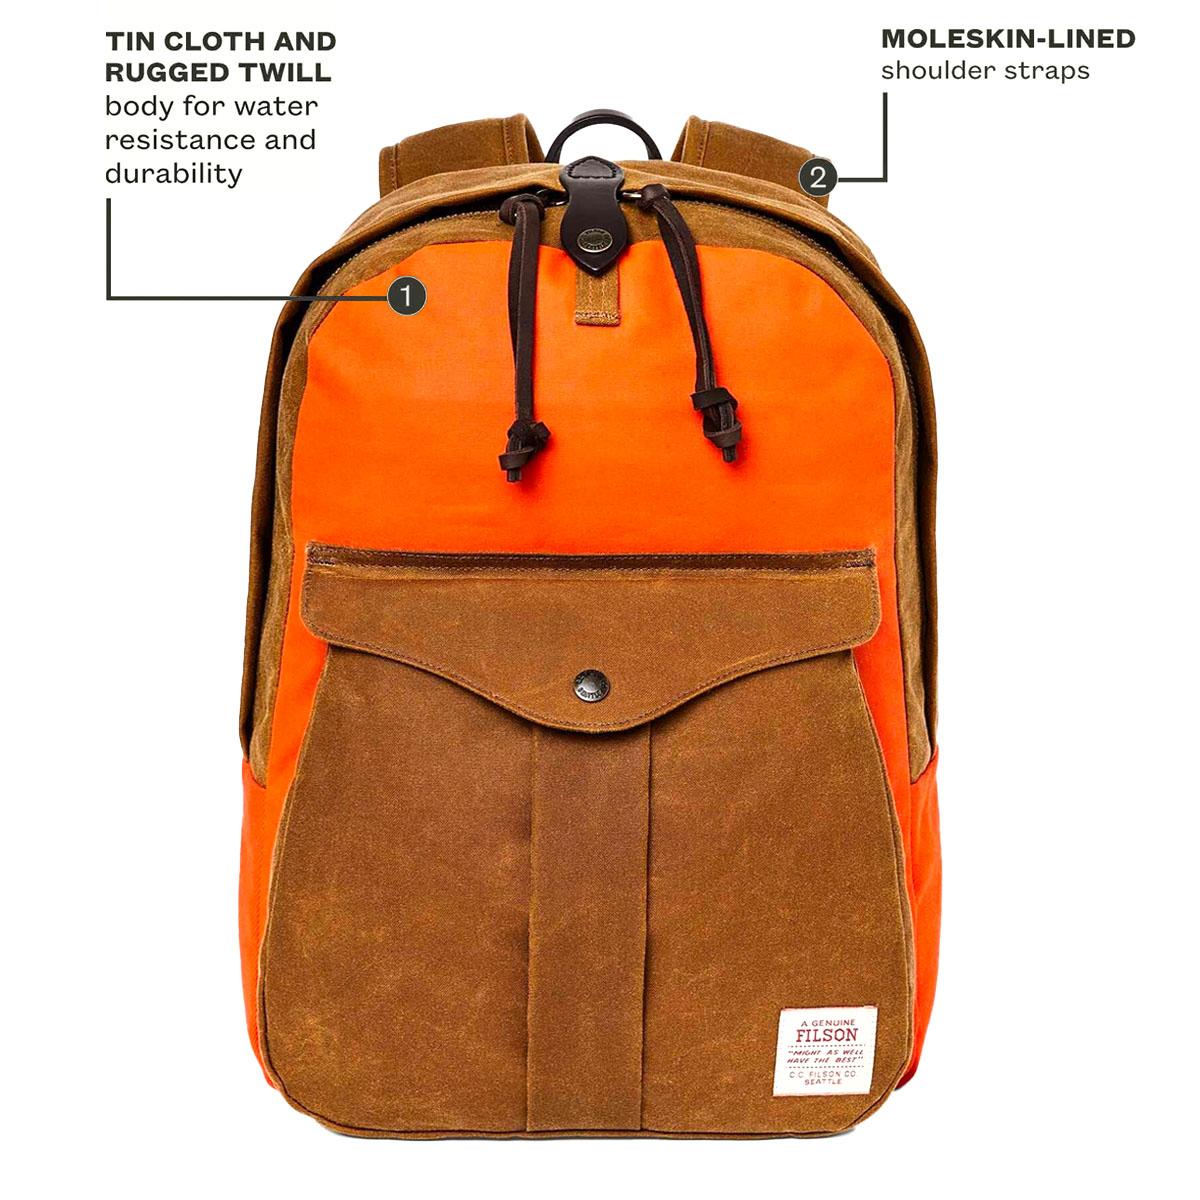 Filson Journeyman Backpack Dark Tan/Flame, made of Tin Cloth and Rugged Twill Canvas for water resistance and durability